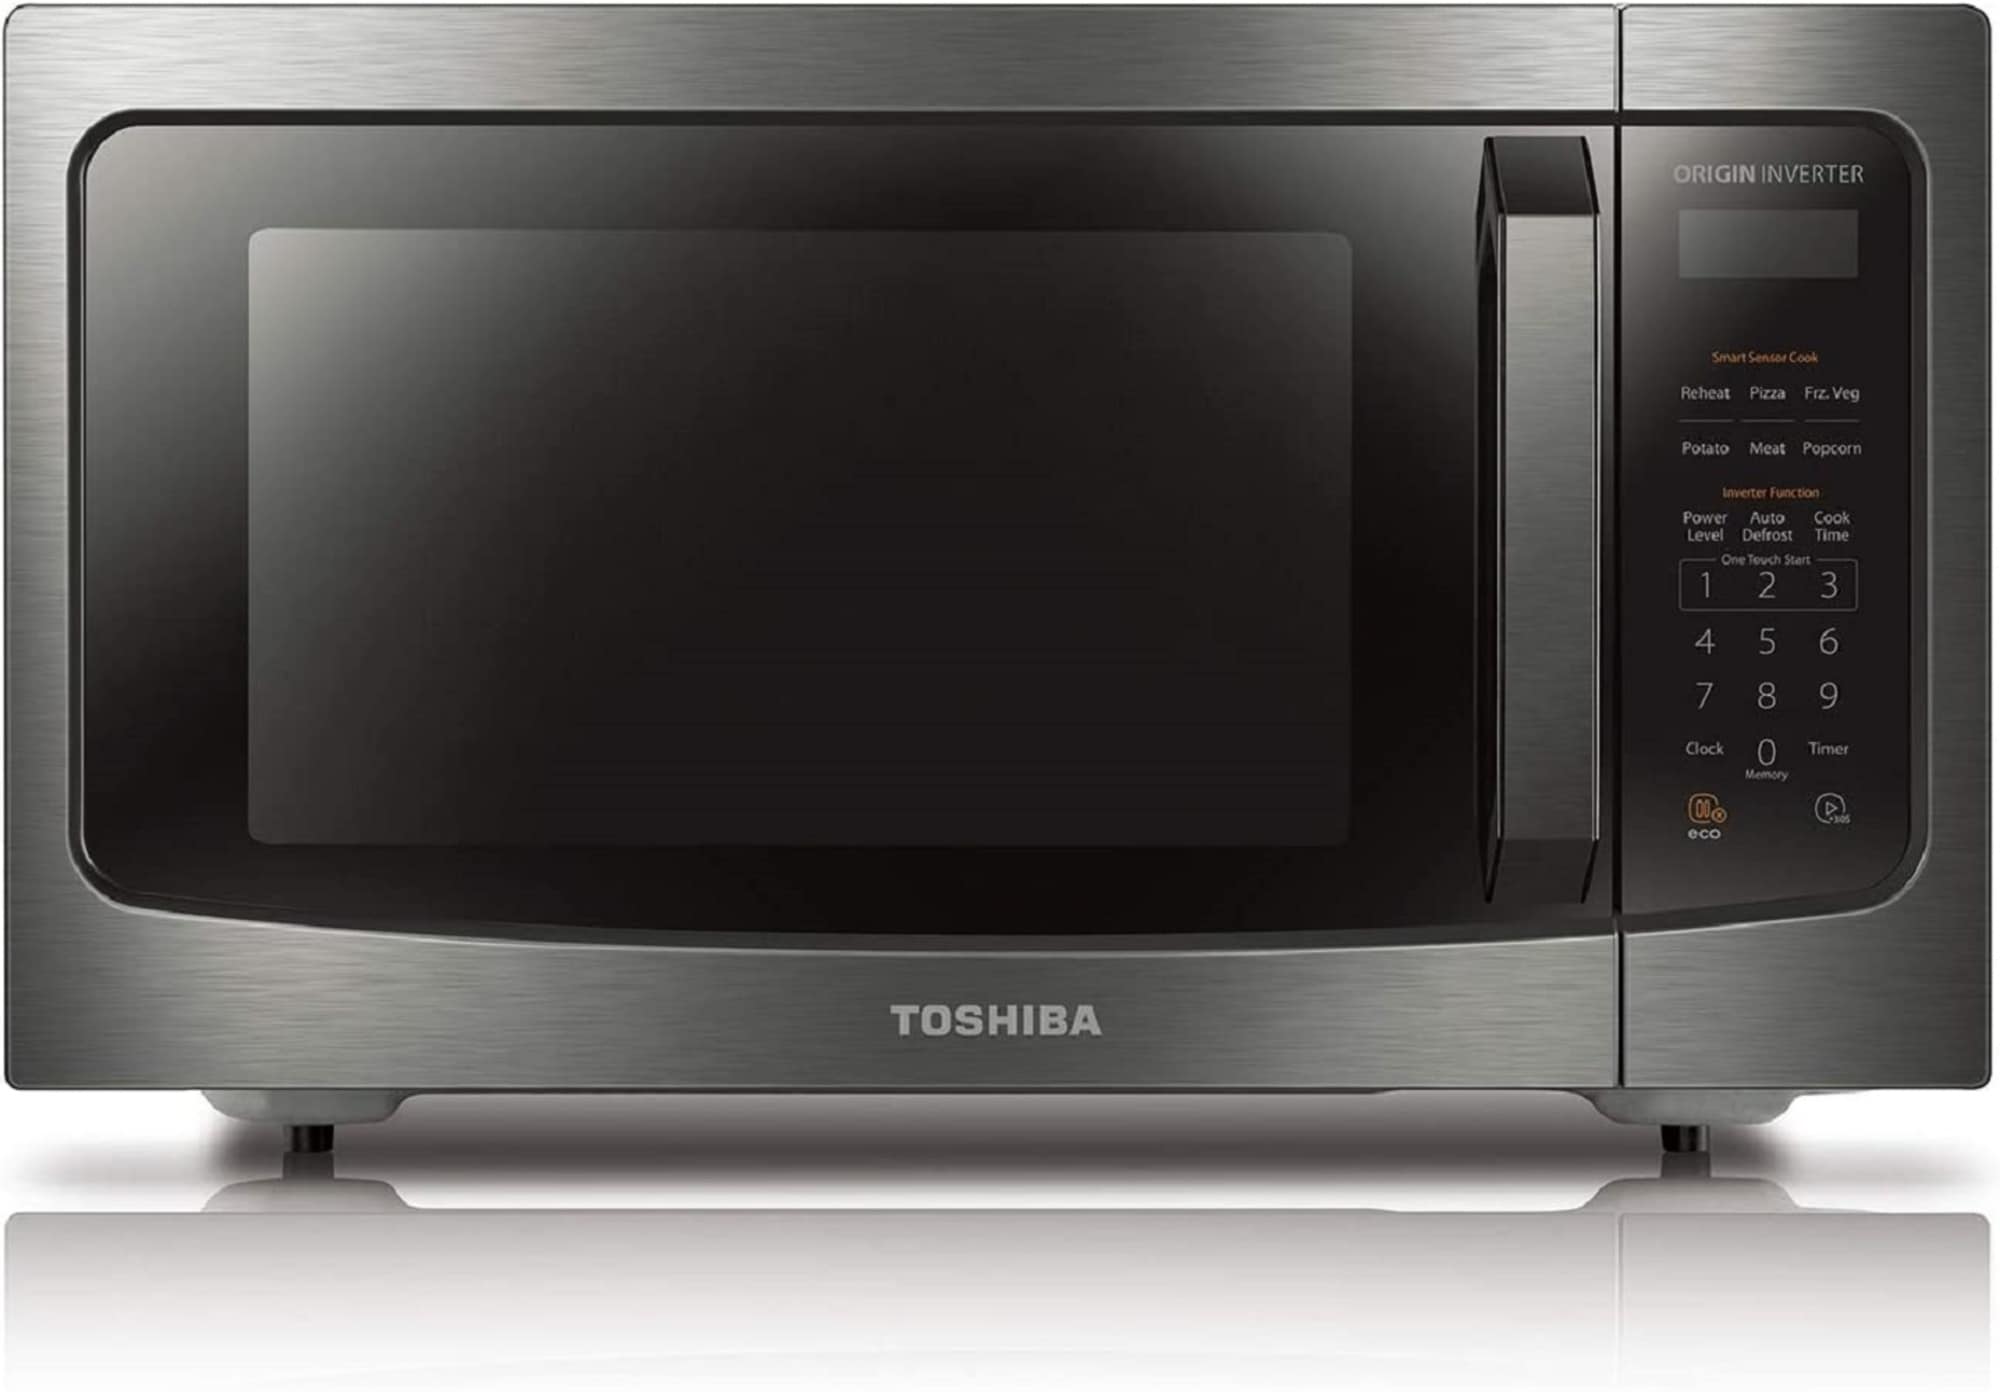 TOSHIBA 6 in 1 Inverter Microwave Oven Air Fryer Combo, Countertop